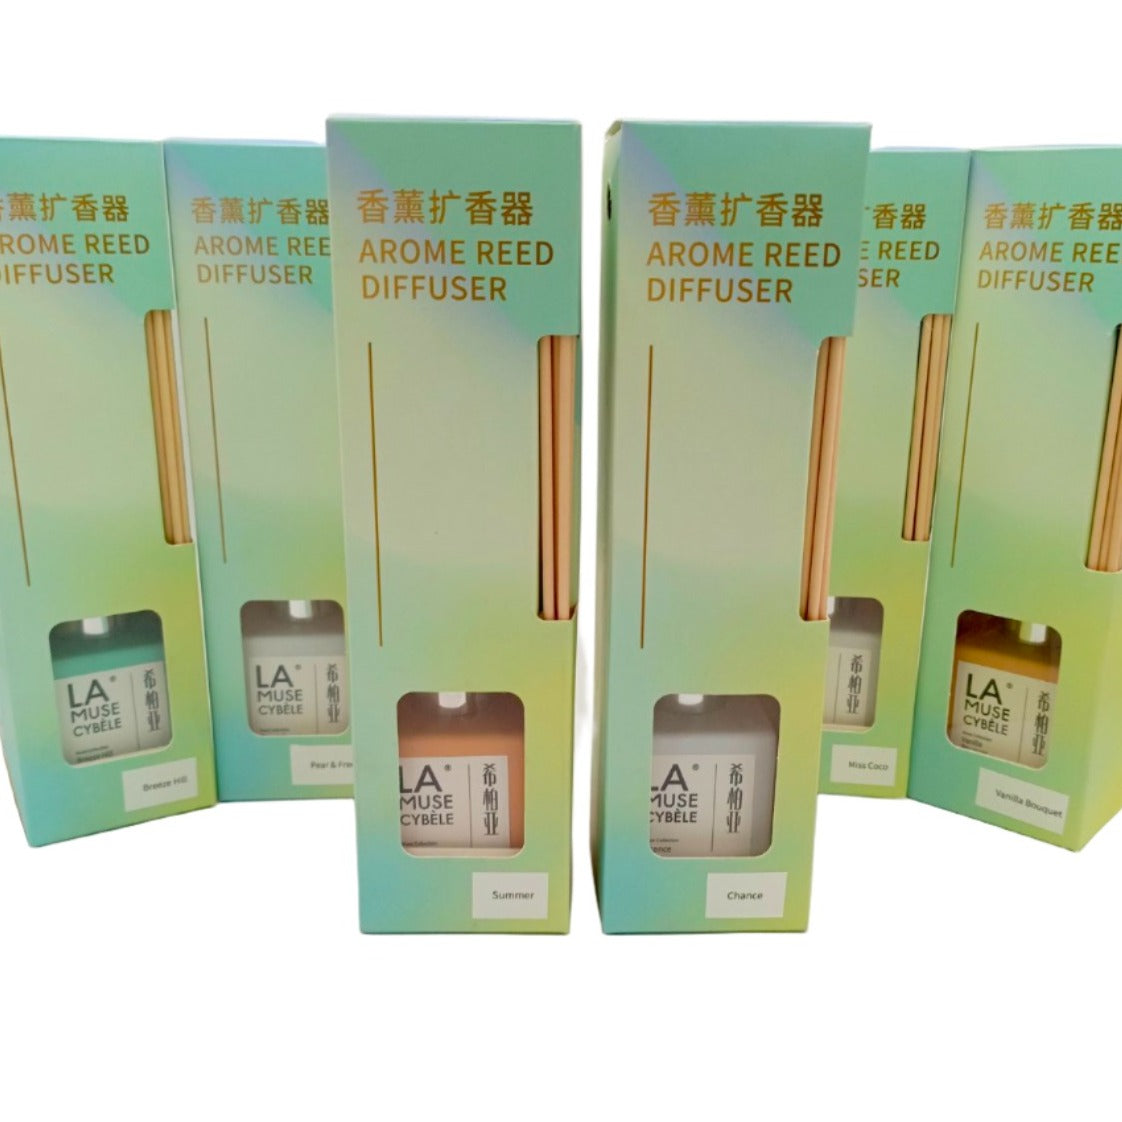 AROME REED DIFFUSER (50ML) BREEZE & HILL